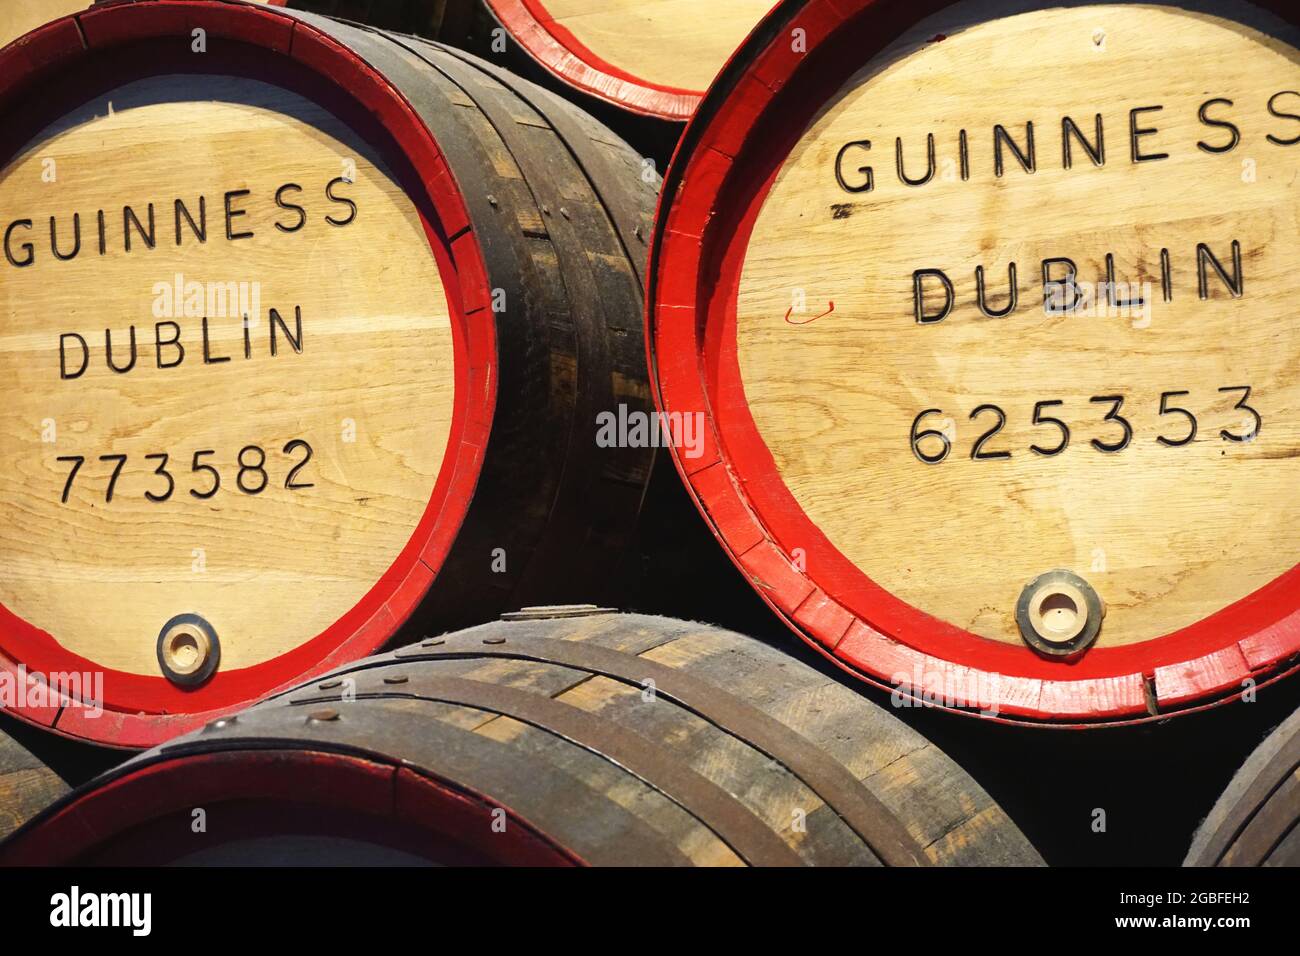 Guinness oak barrel heads in Dublin, Ireland. Founded by Arthur Guinness in 1759, the Guinness Brewery was once the largest brewery in the world. Stock Photo